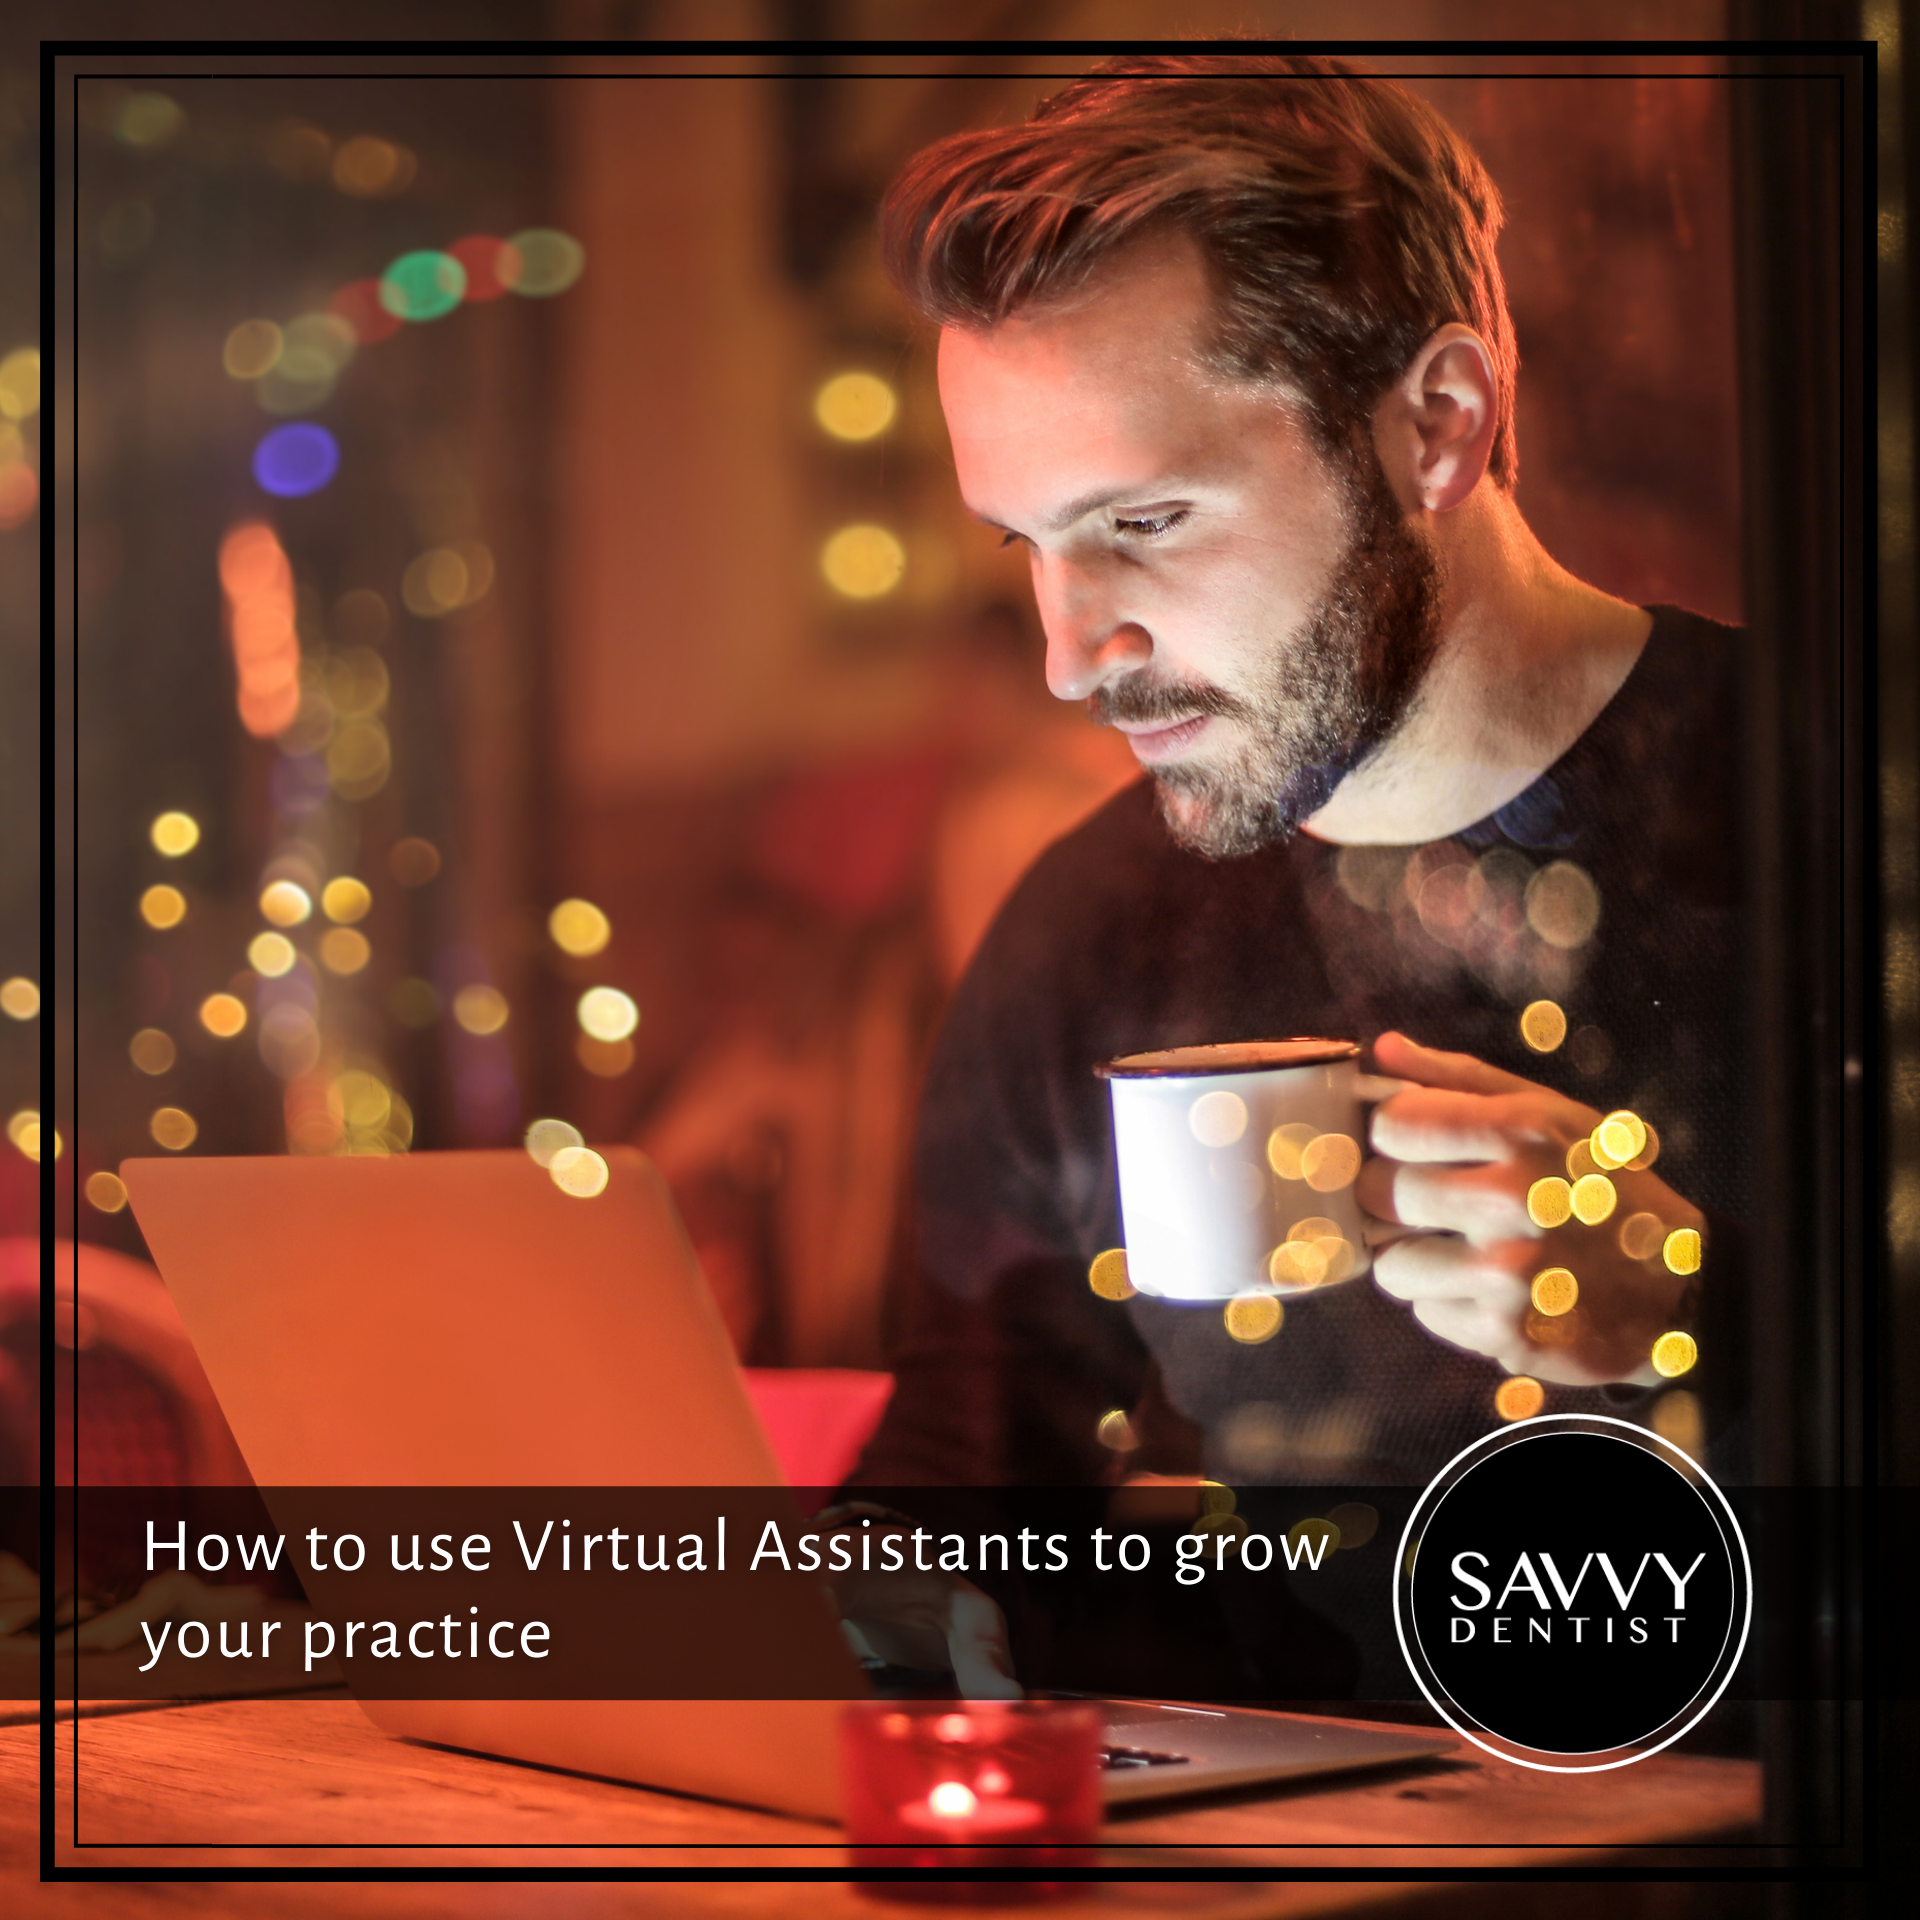 How to use Virtual Assistants to grow your practice